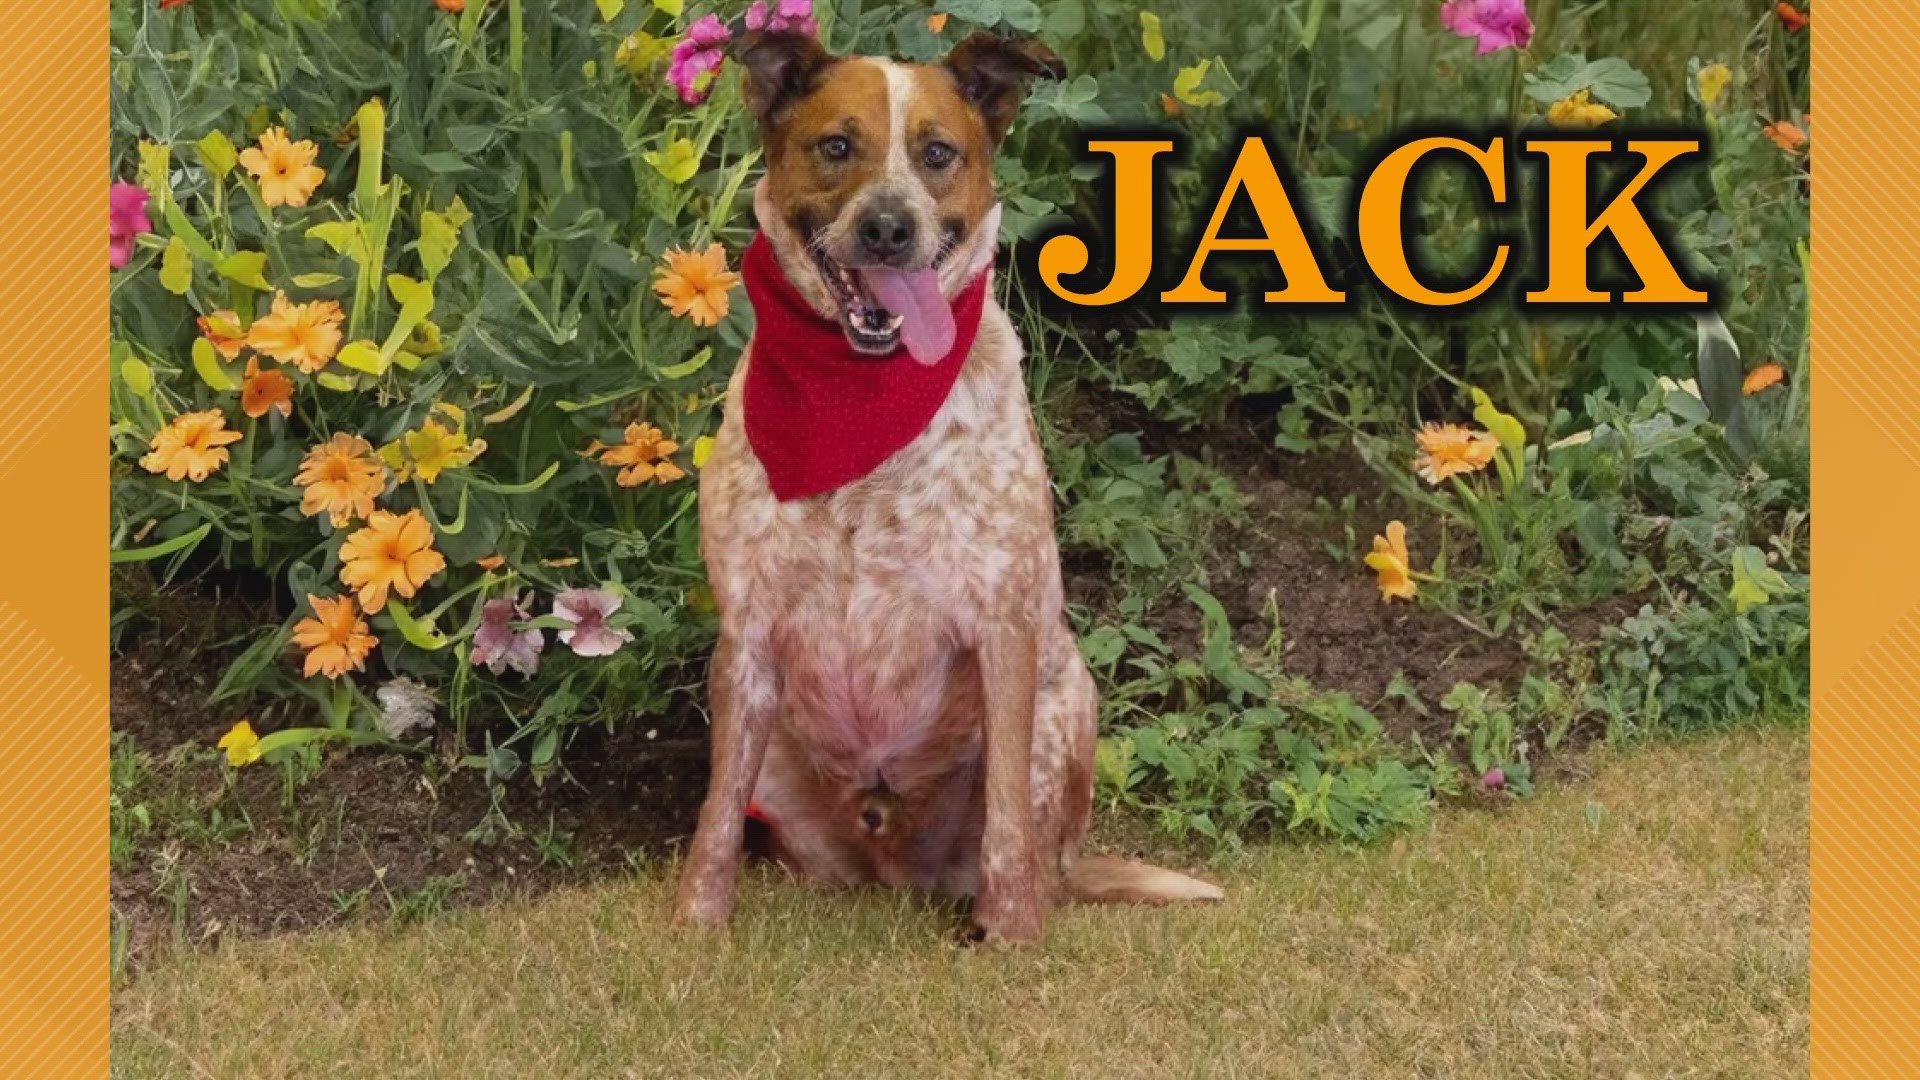 If you love a dog that gives the best hugs and is a great travel buddy, then Jack is the pet for your family.